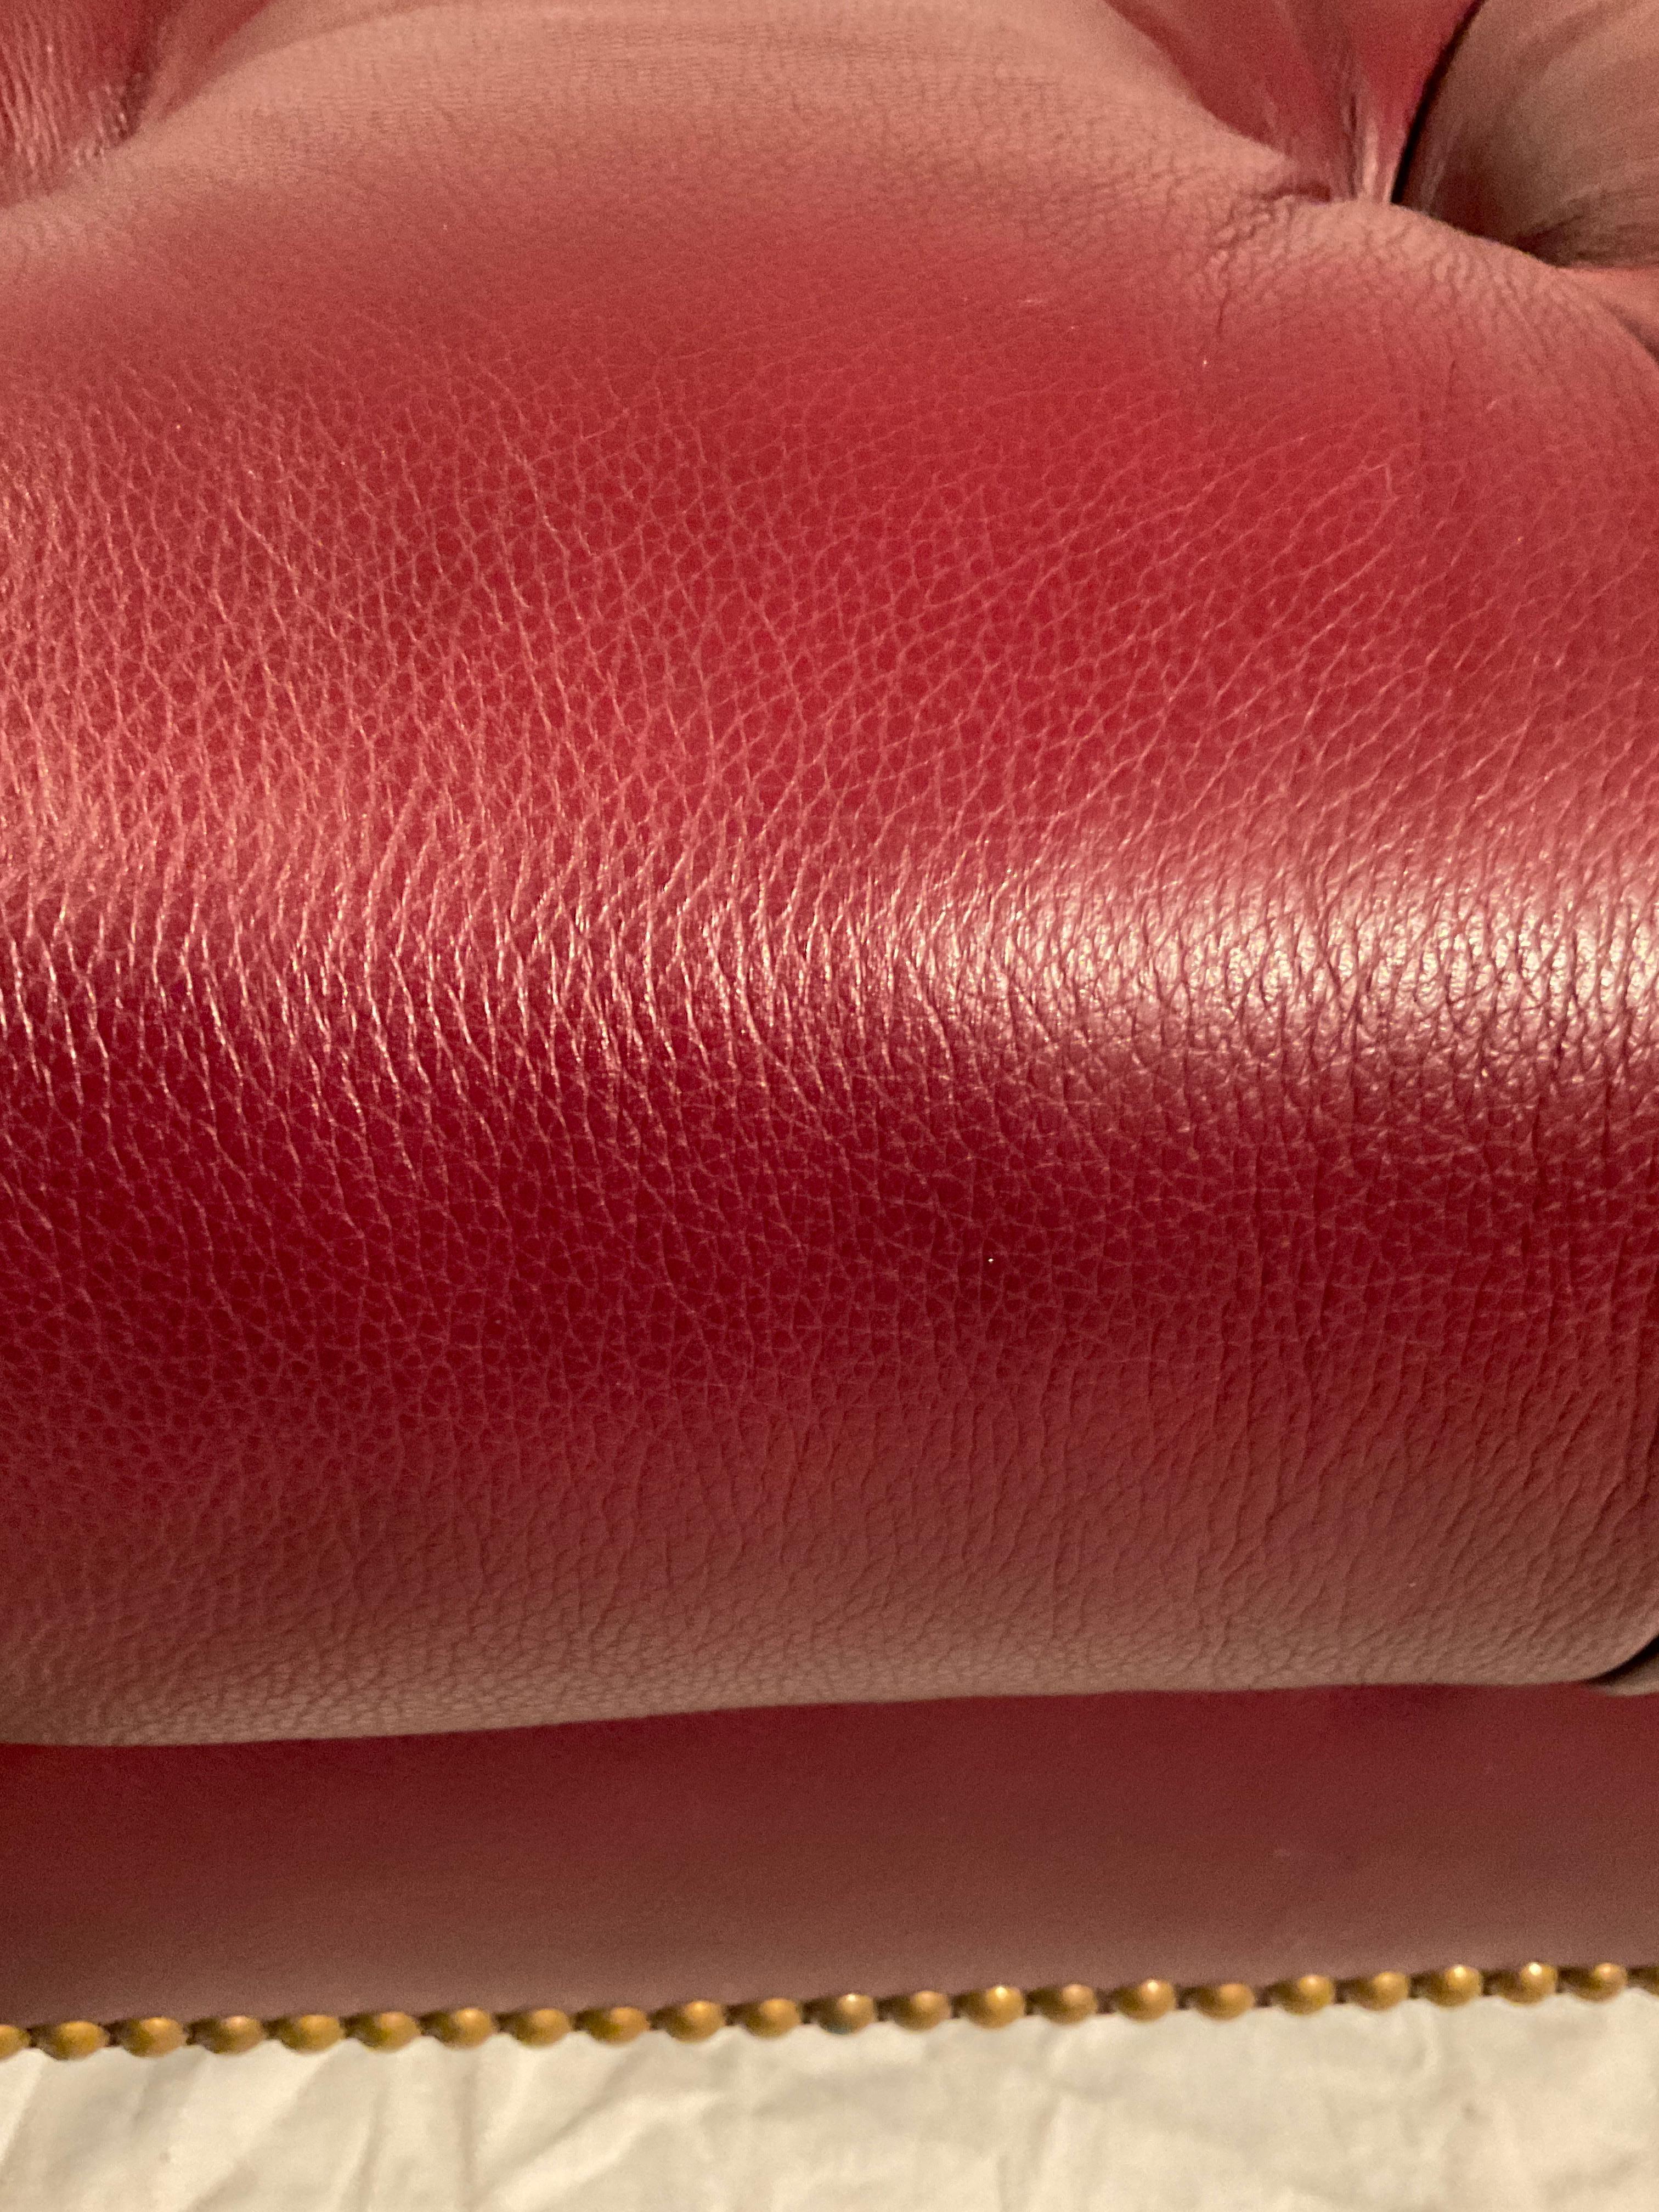 Edward Ferrell Tufted Red Leather Ottoman On Brass Casters For Sale 4